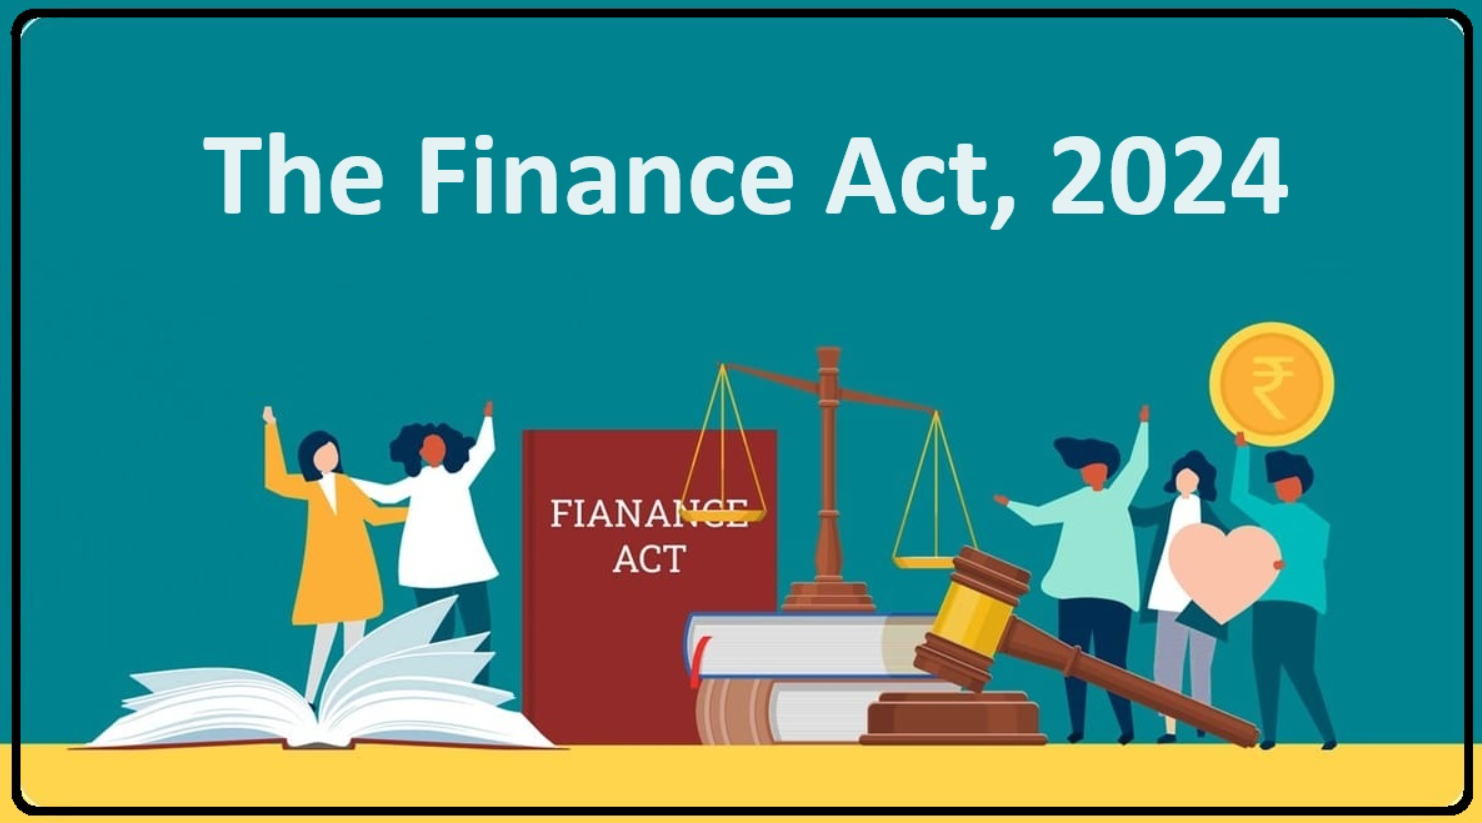 The Government has notified the Finance Act, 2024 (“the Finance Act”)